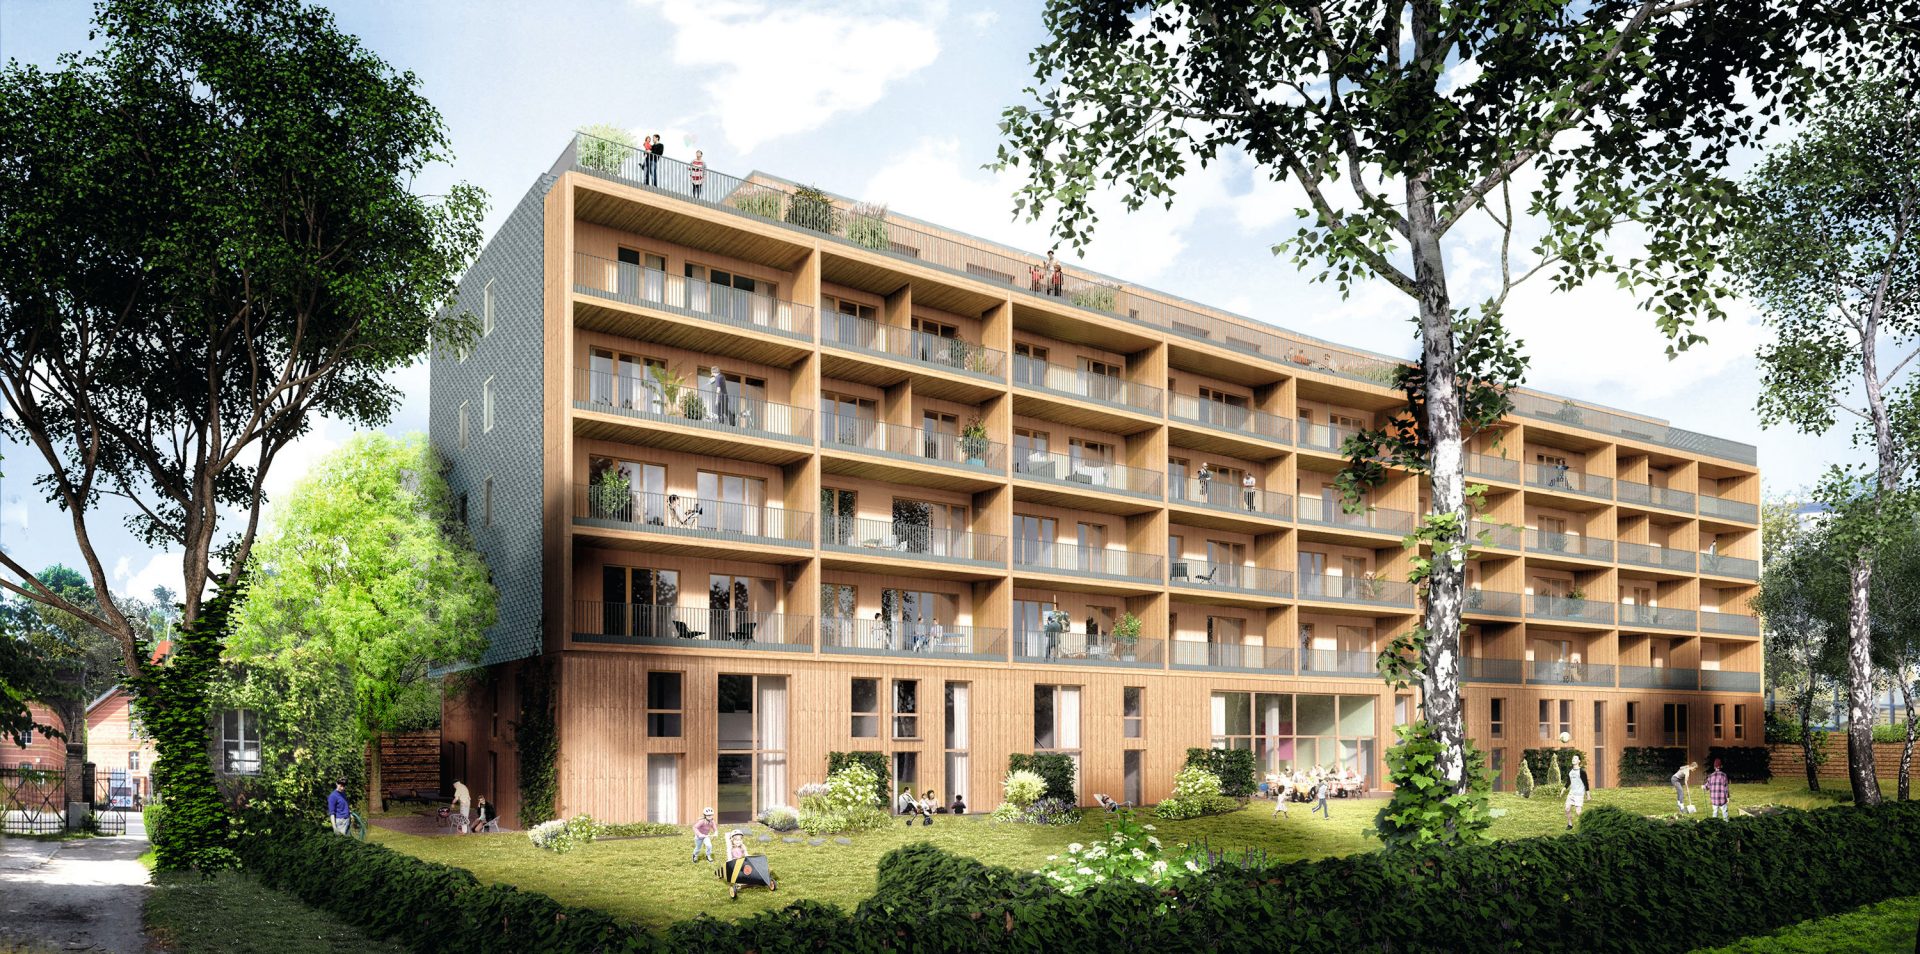 Architects impression of the Walden 48 timber multi-story building in Berlin, Germany 